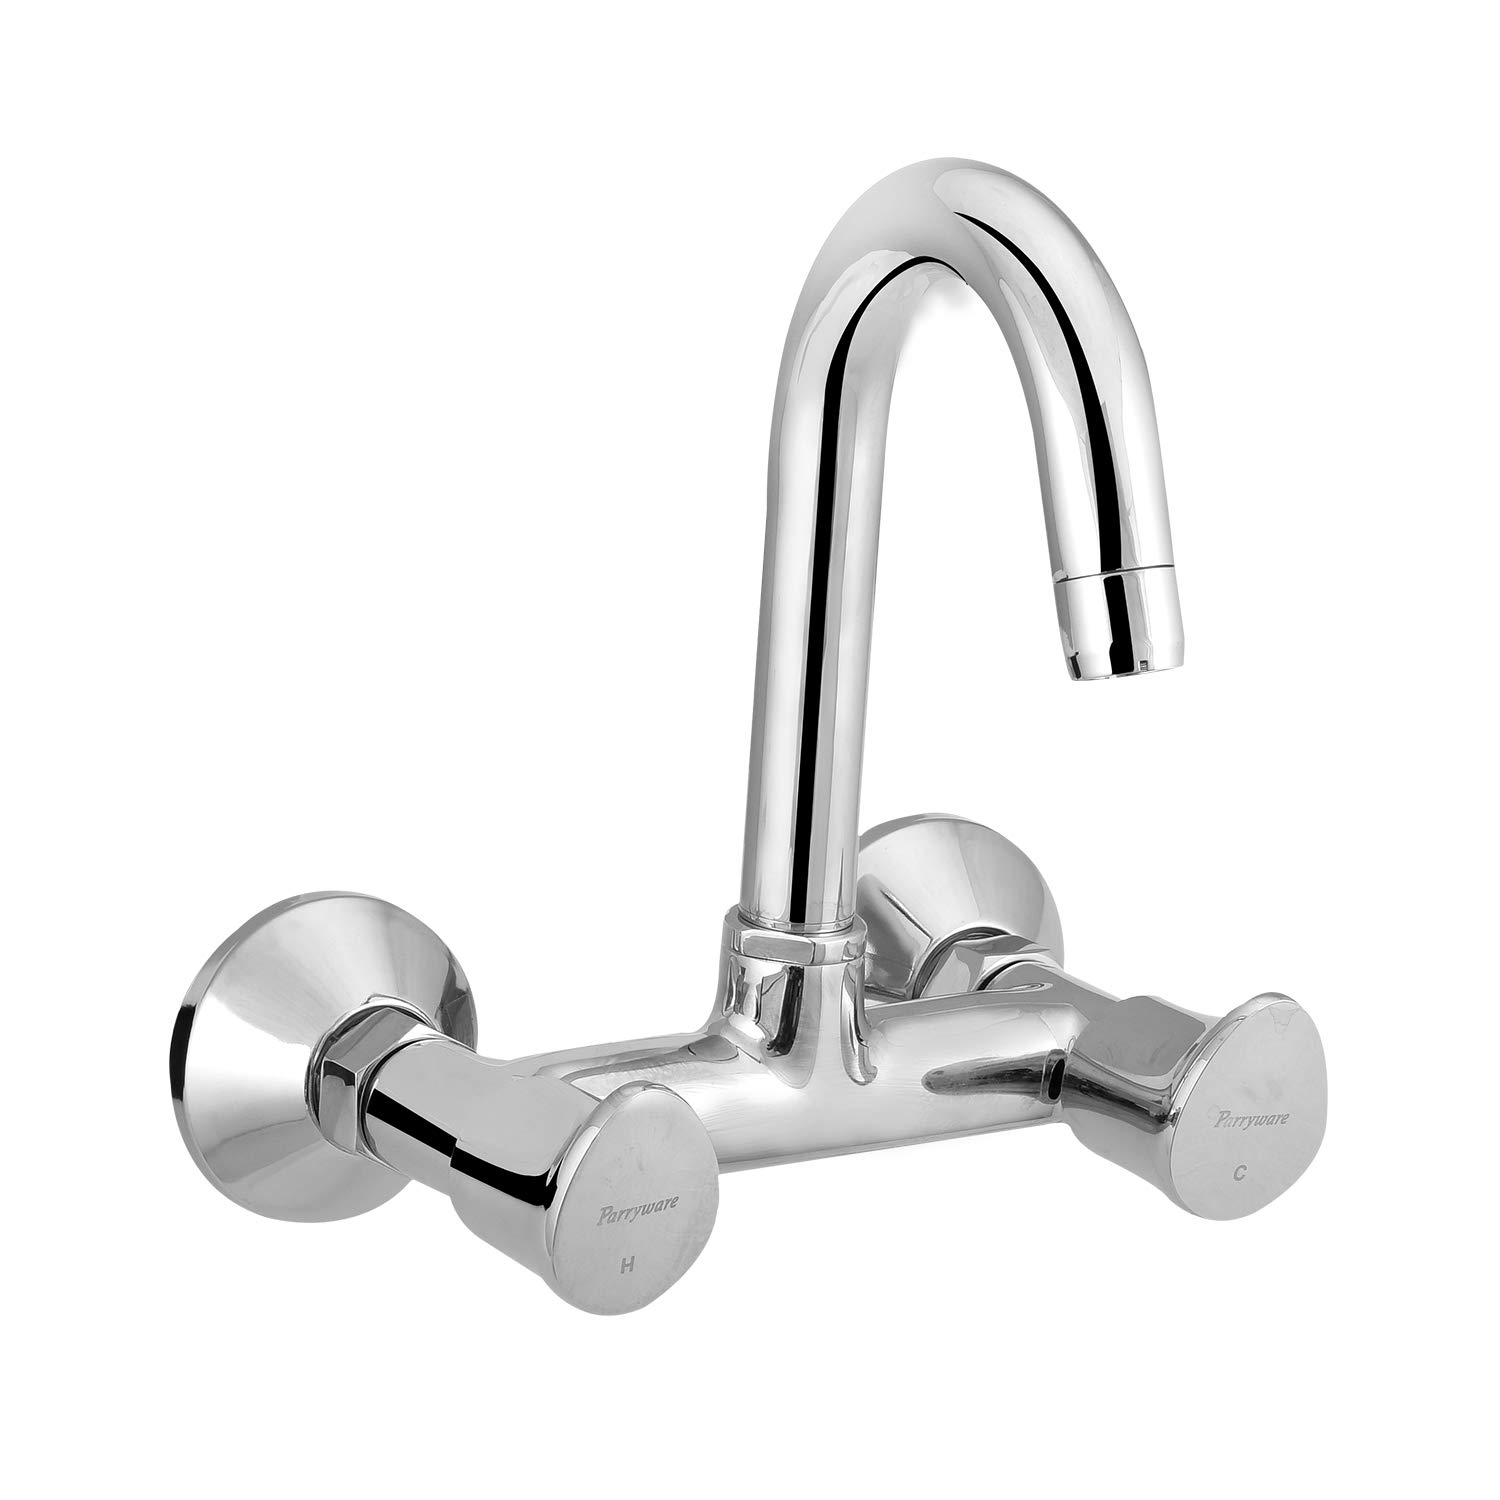 Parryware Droplet Wall Mounted Sink Mixer G4735A1 (Quarter Turn Range with Ceramic Innerhead)